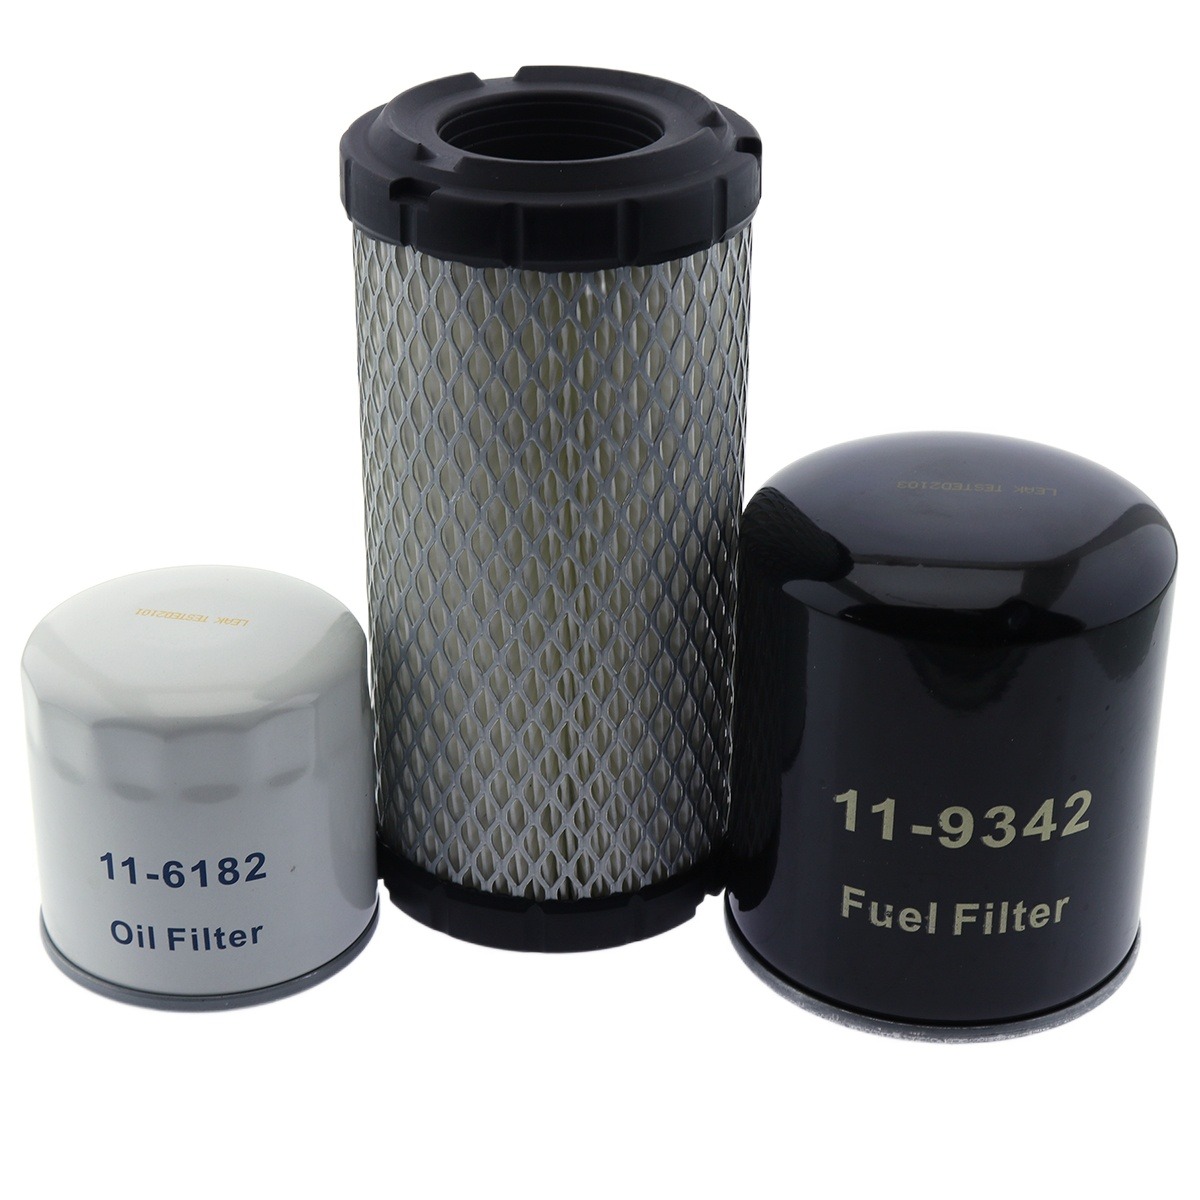 Filter Kit 11-6182 11-9059 11-9342 for Thermo King Tripac APU or Evolution - image 1 of 5